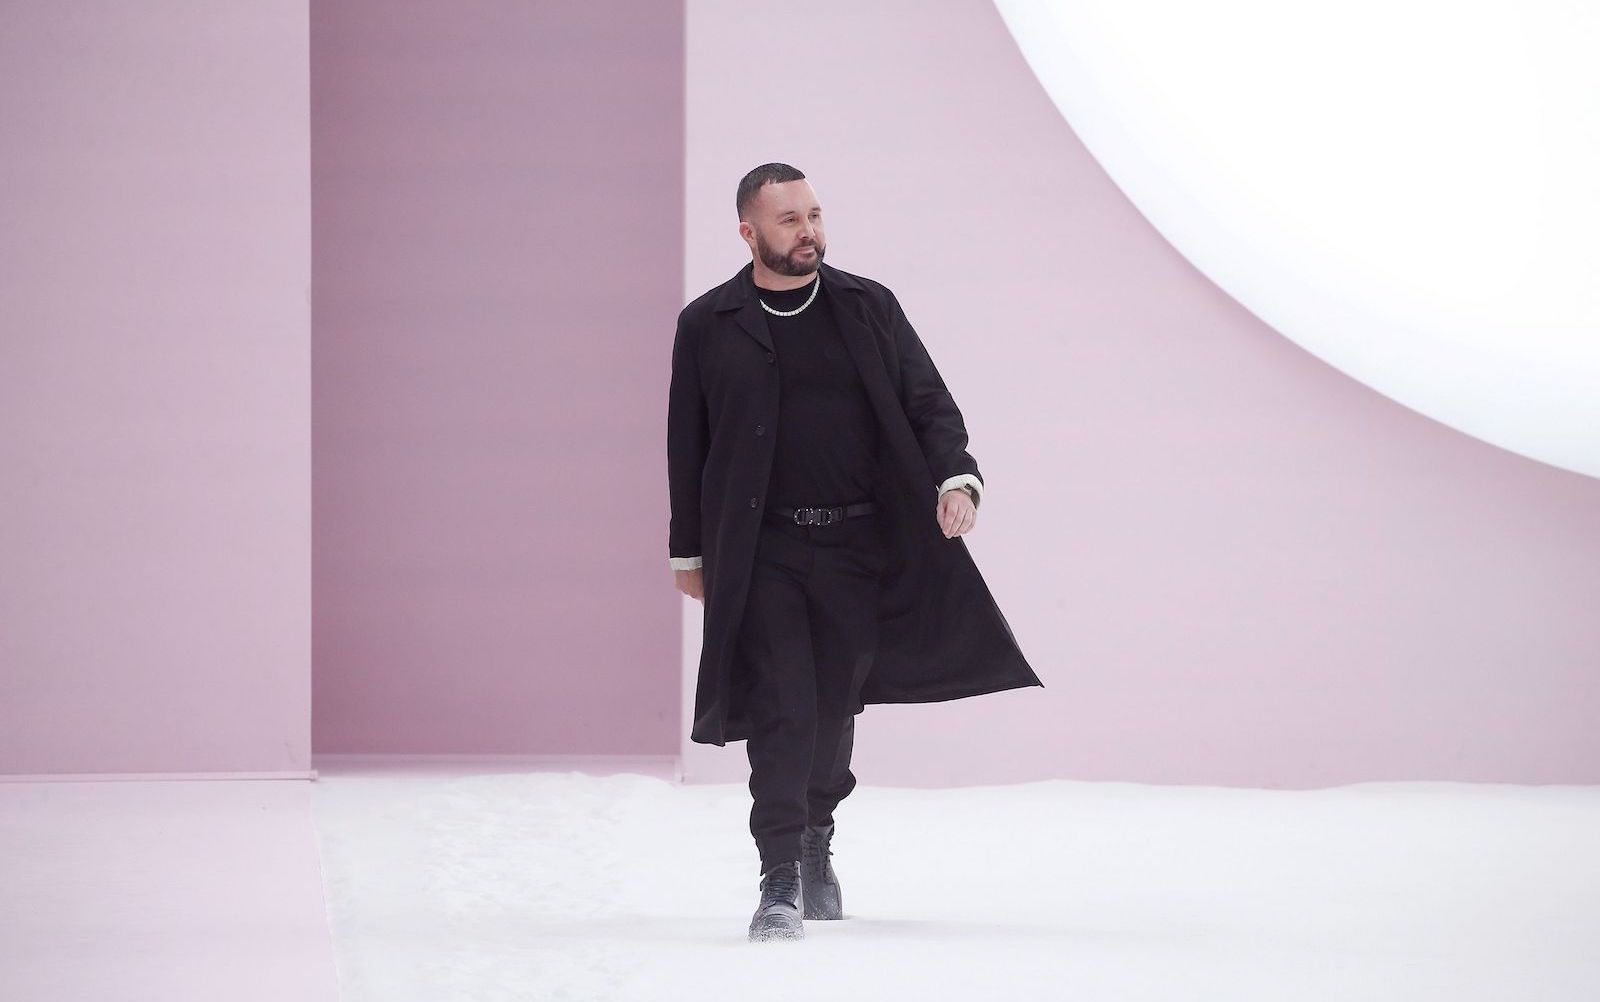 Dior Homme appoints Kim Jones as its new artistic director, Fashion